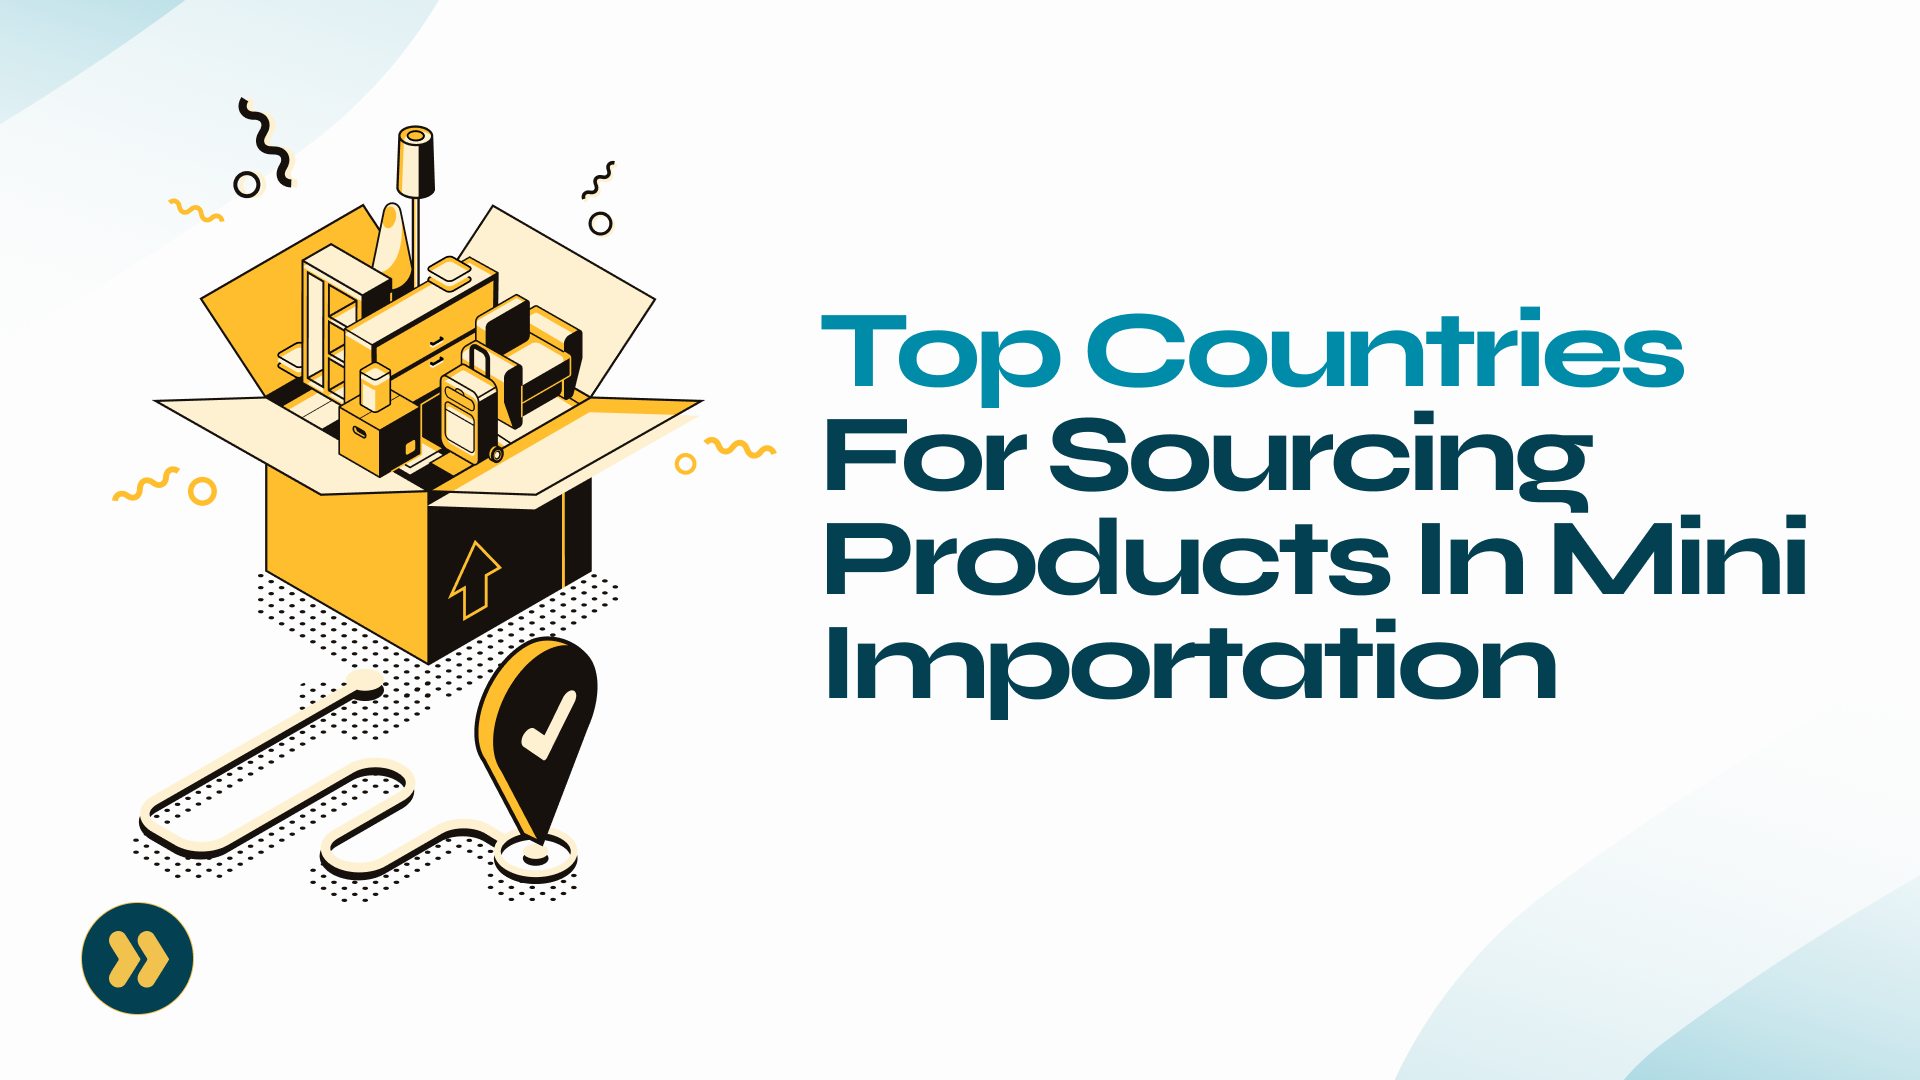 Top Countries for Sourcing Products in Mini Importation